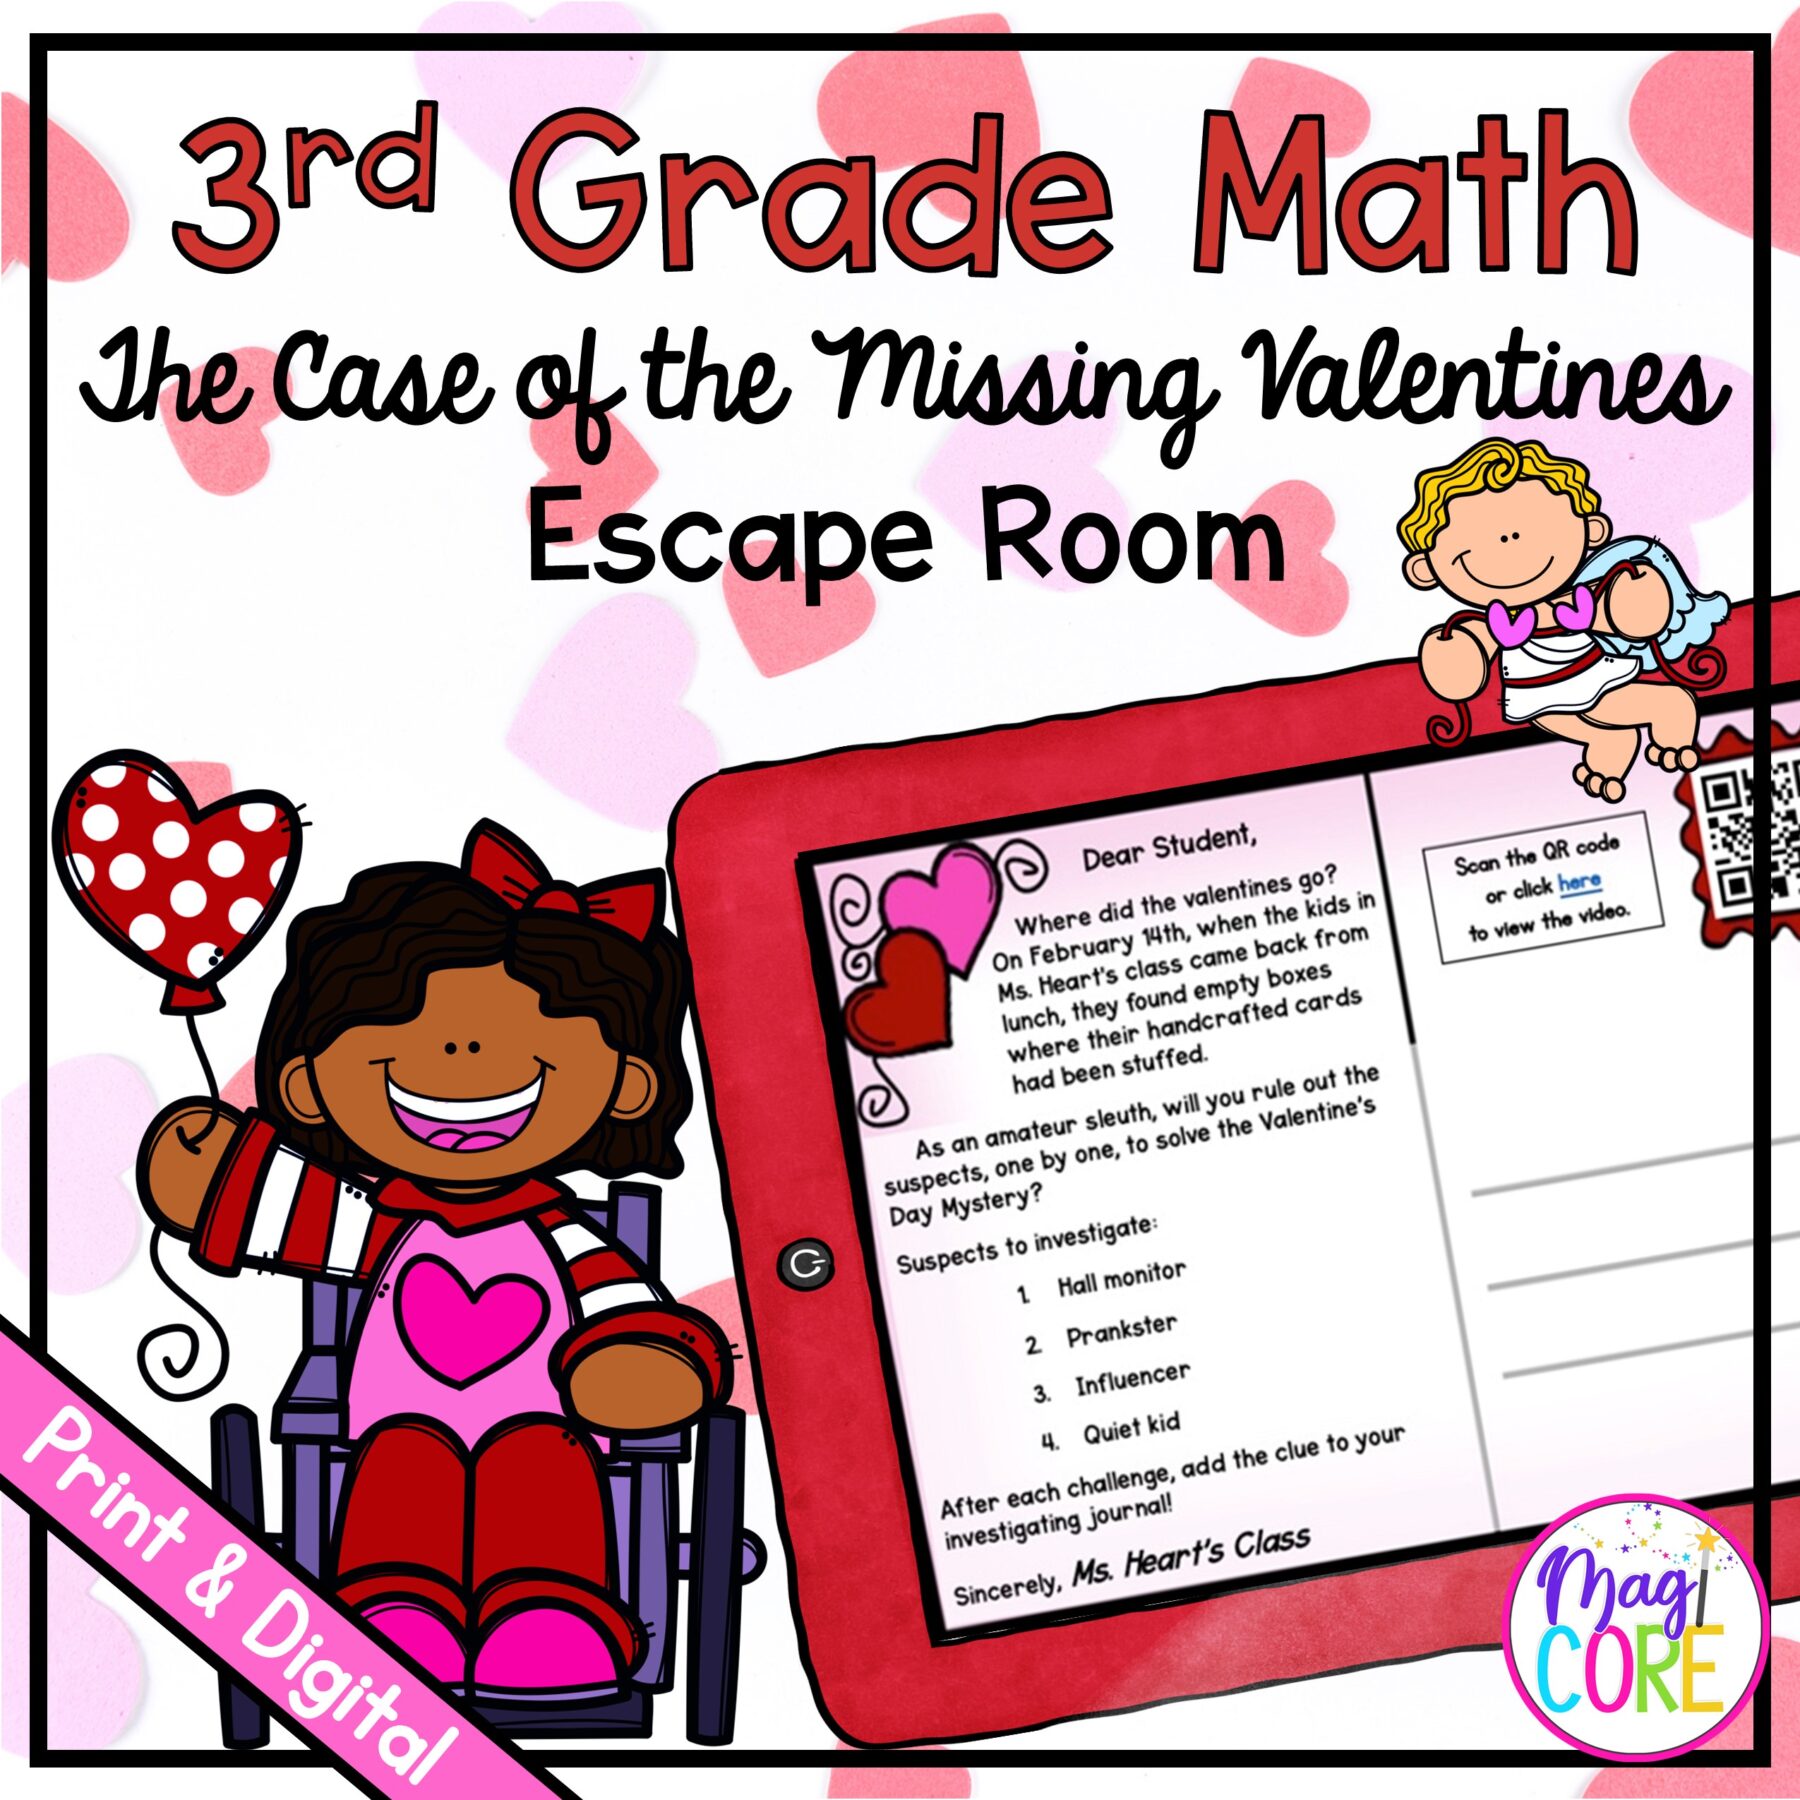 3rd Grade Math The Case of Missing Valentines Escape Room & Webscape™